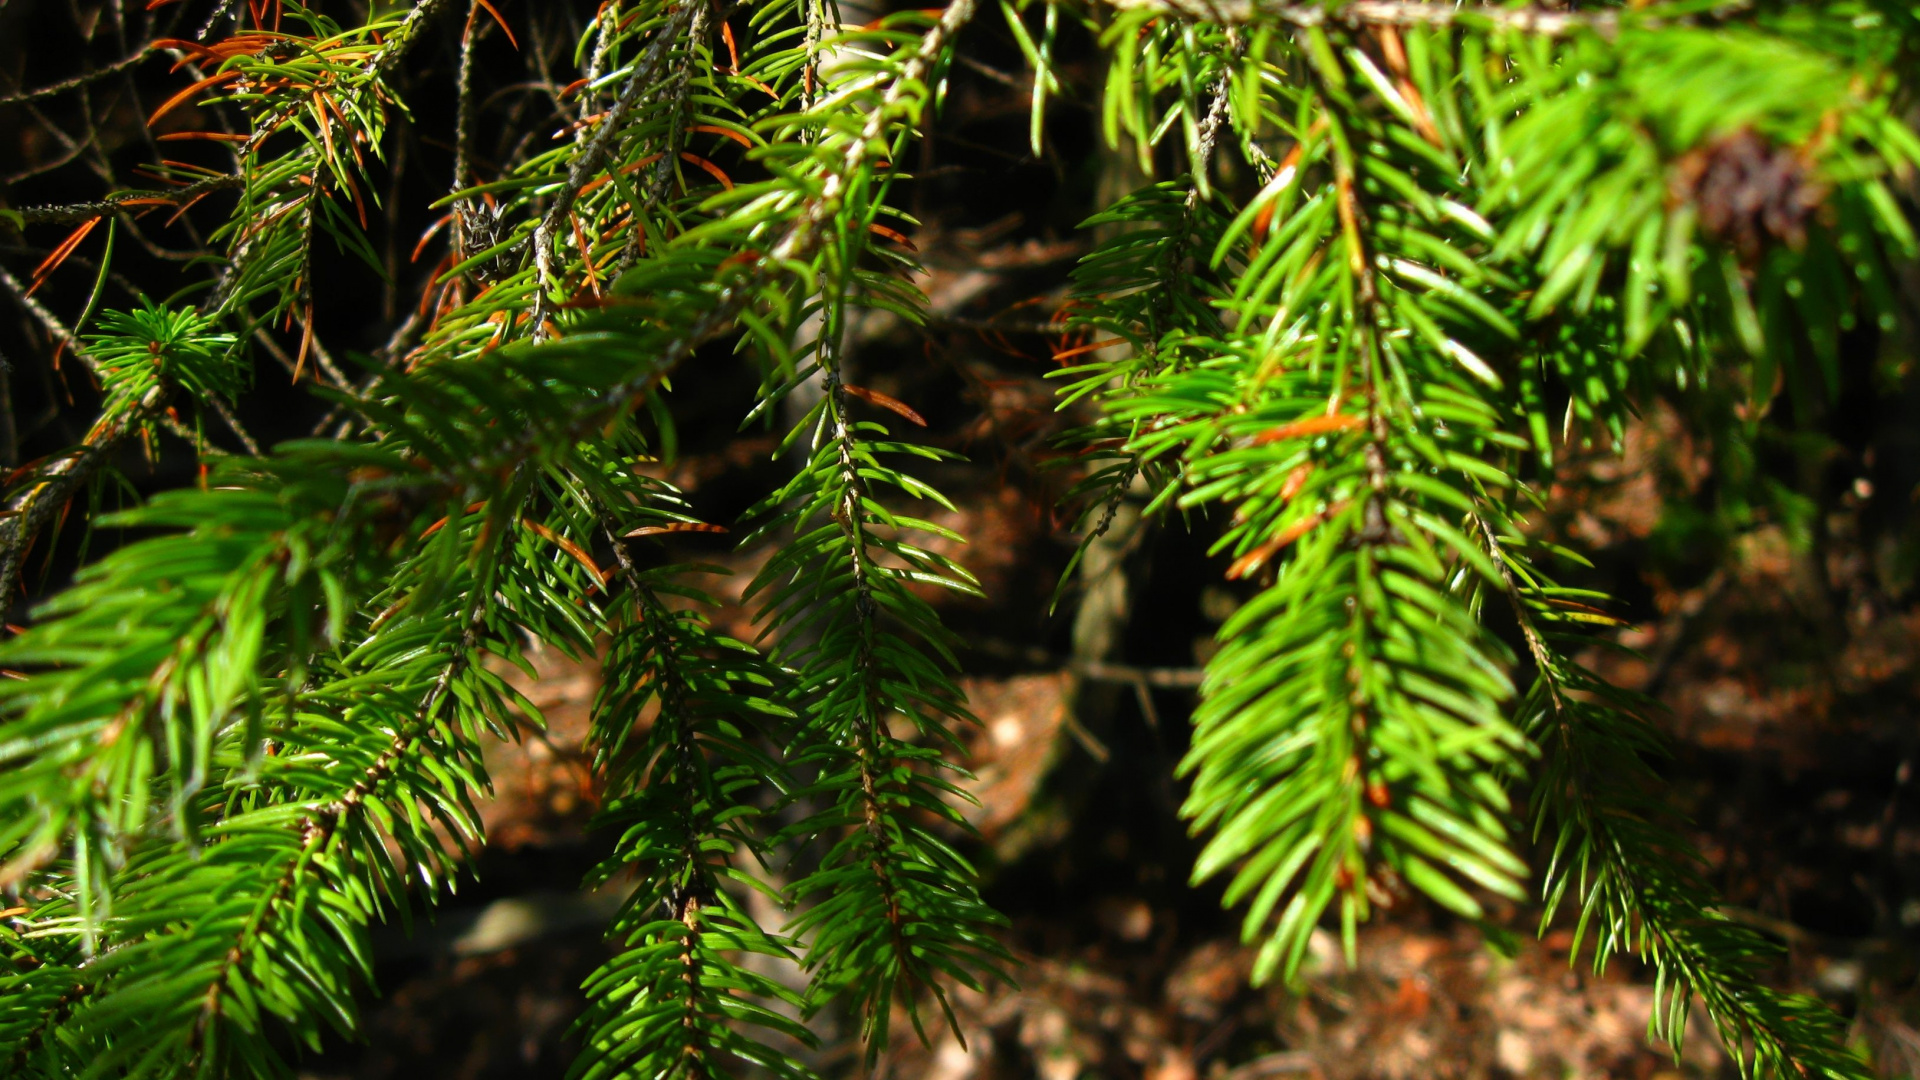 Green Pine Tree Leaves in Close up Photography. Wallpaper in 1920x1080 Resolution